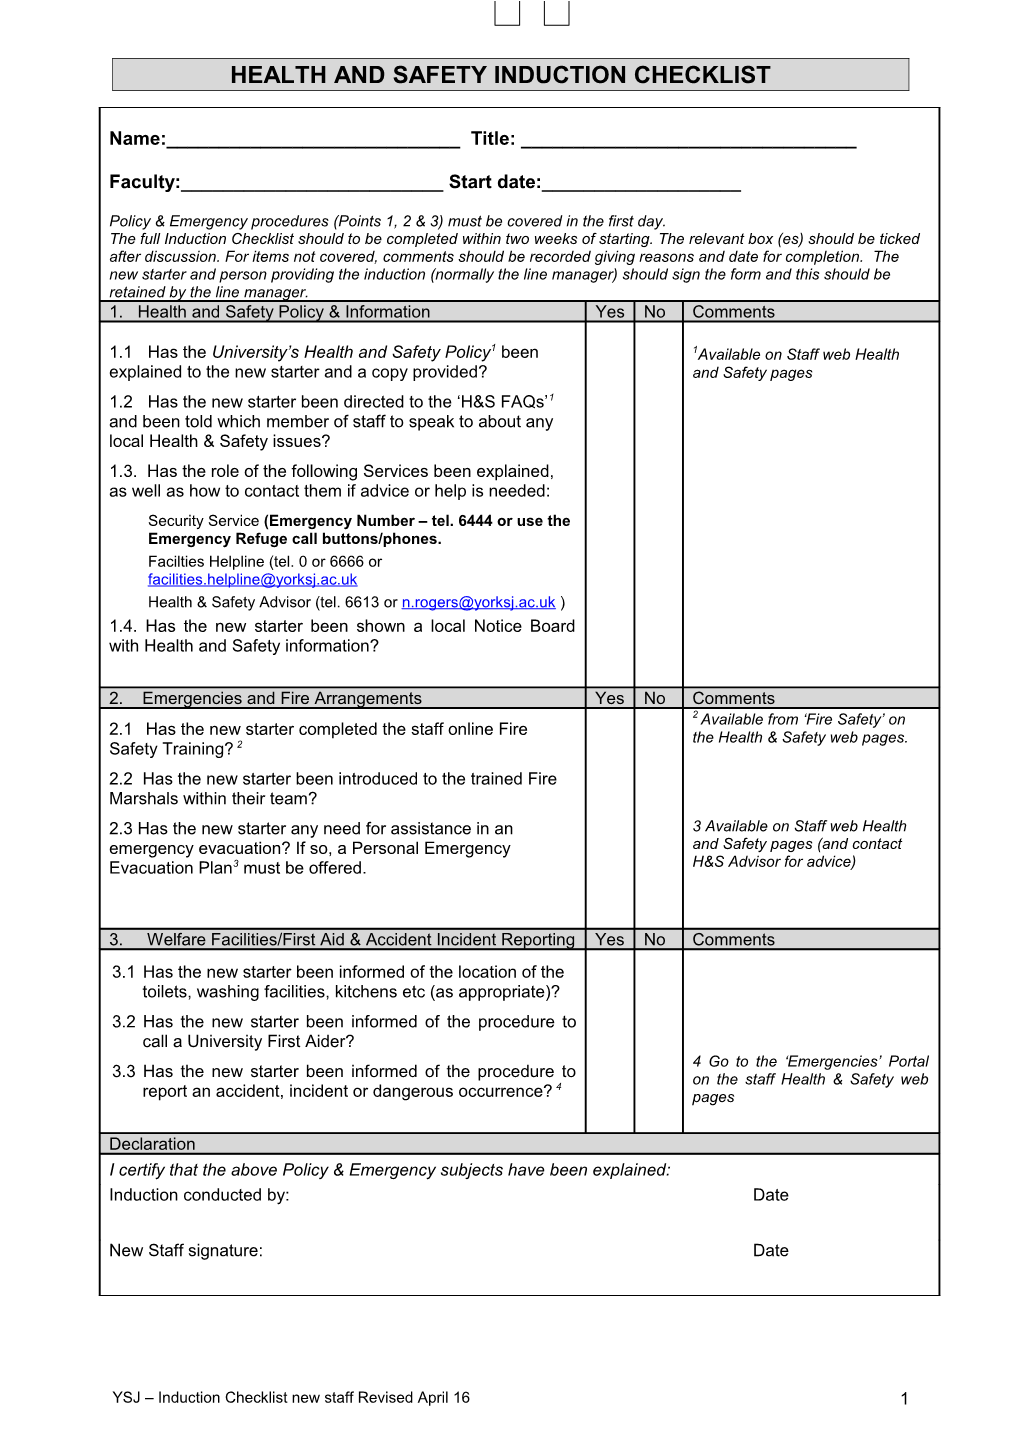 Health and Safety Induction Checklist s1